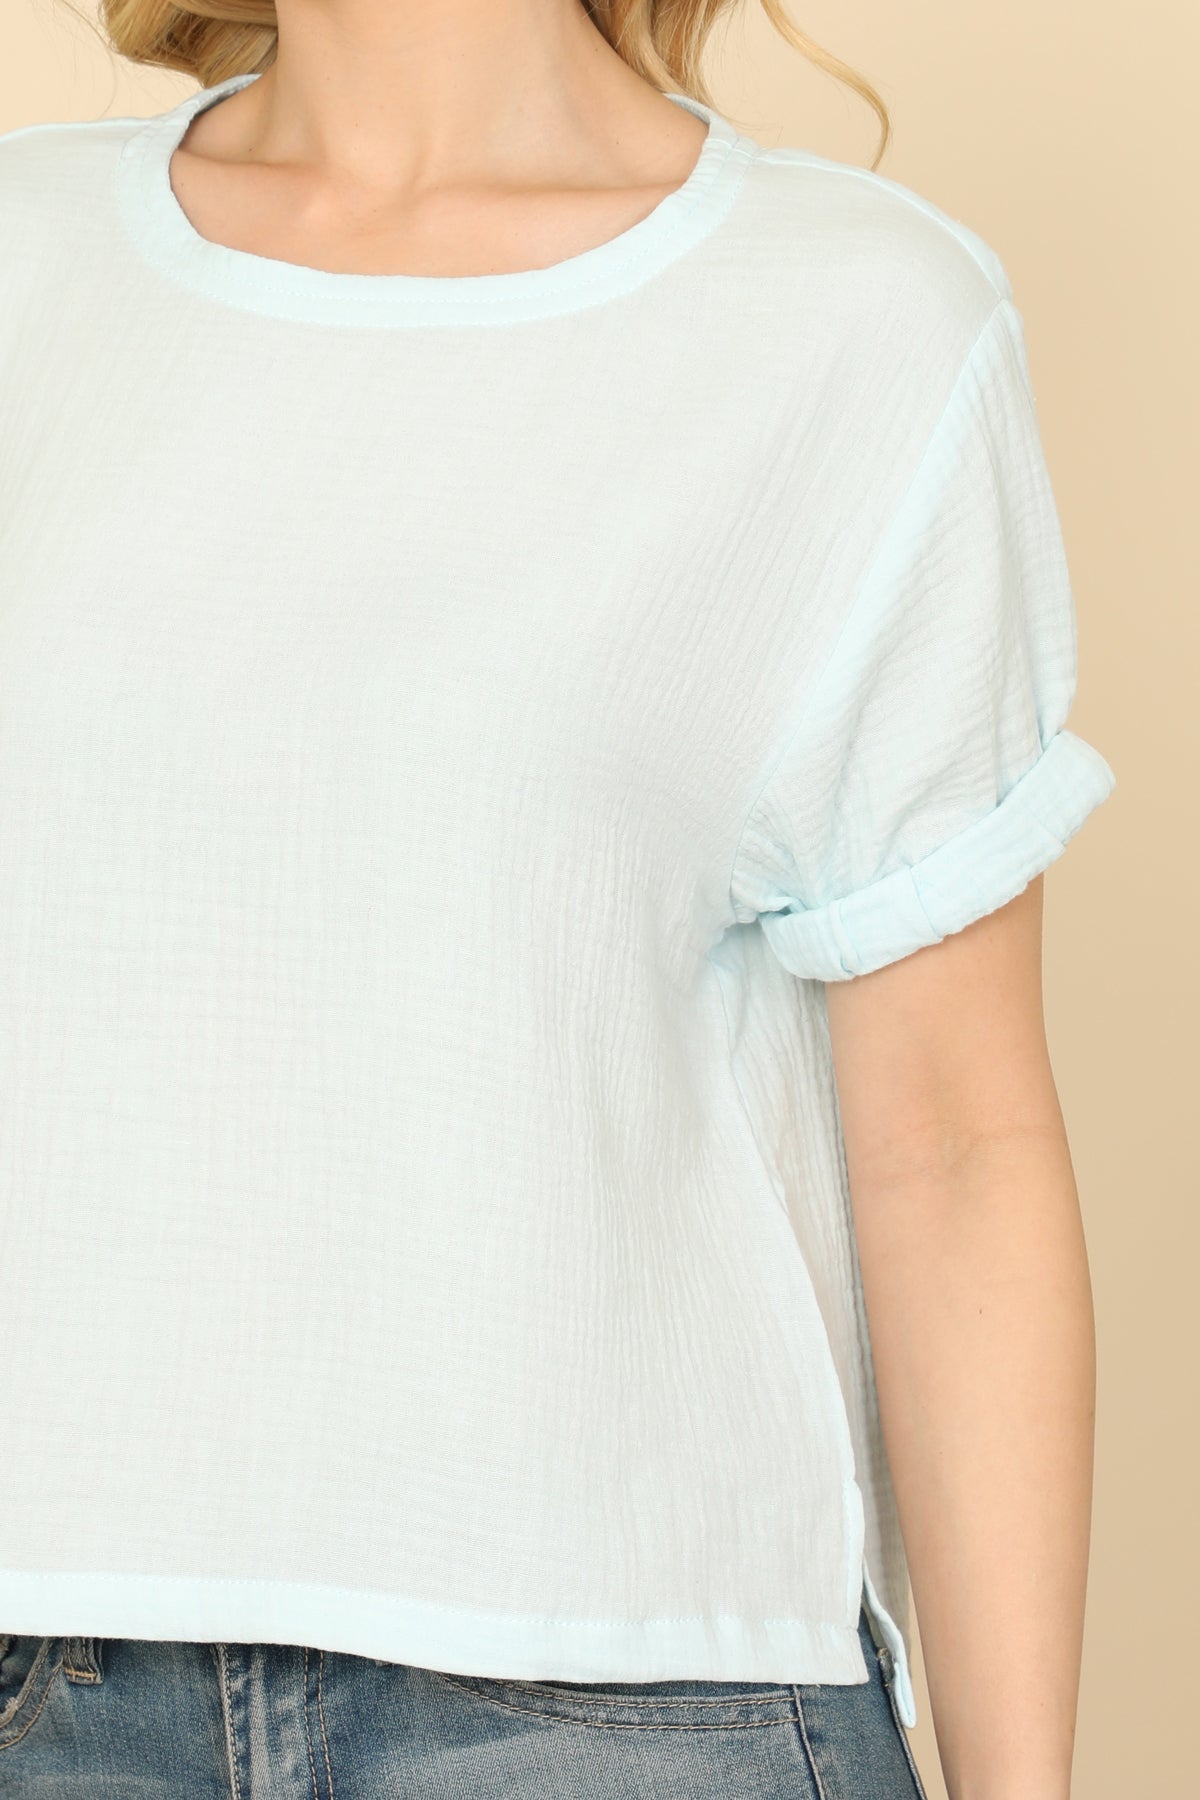 SHORT SLEEVE HANGING BLOUSE SOLID TOP 2-2-1